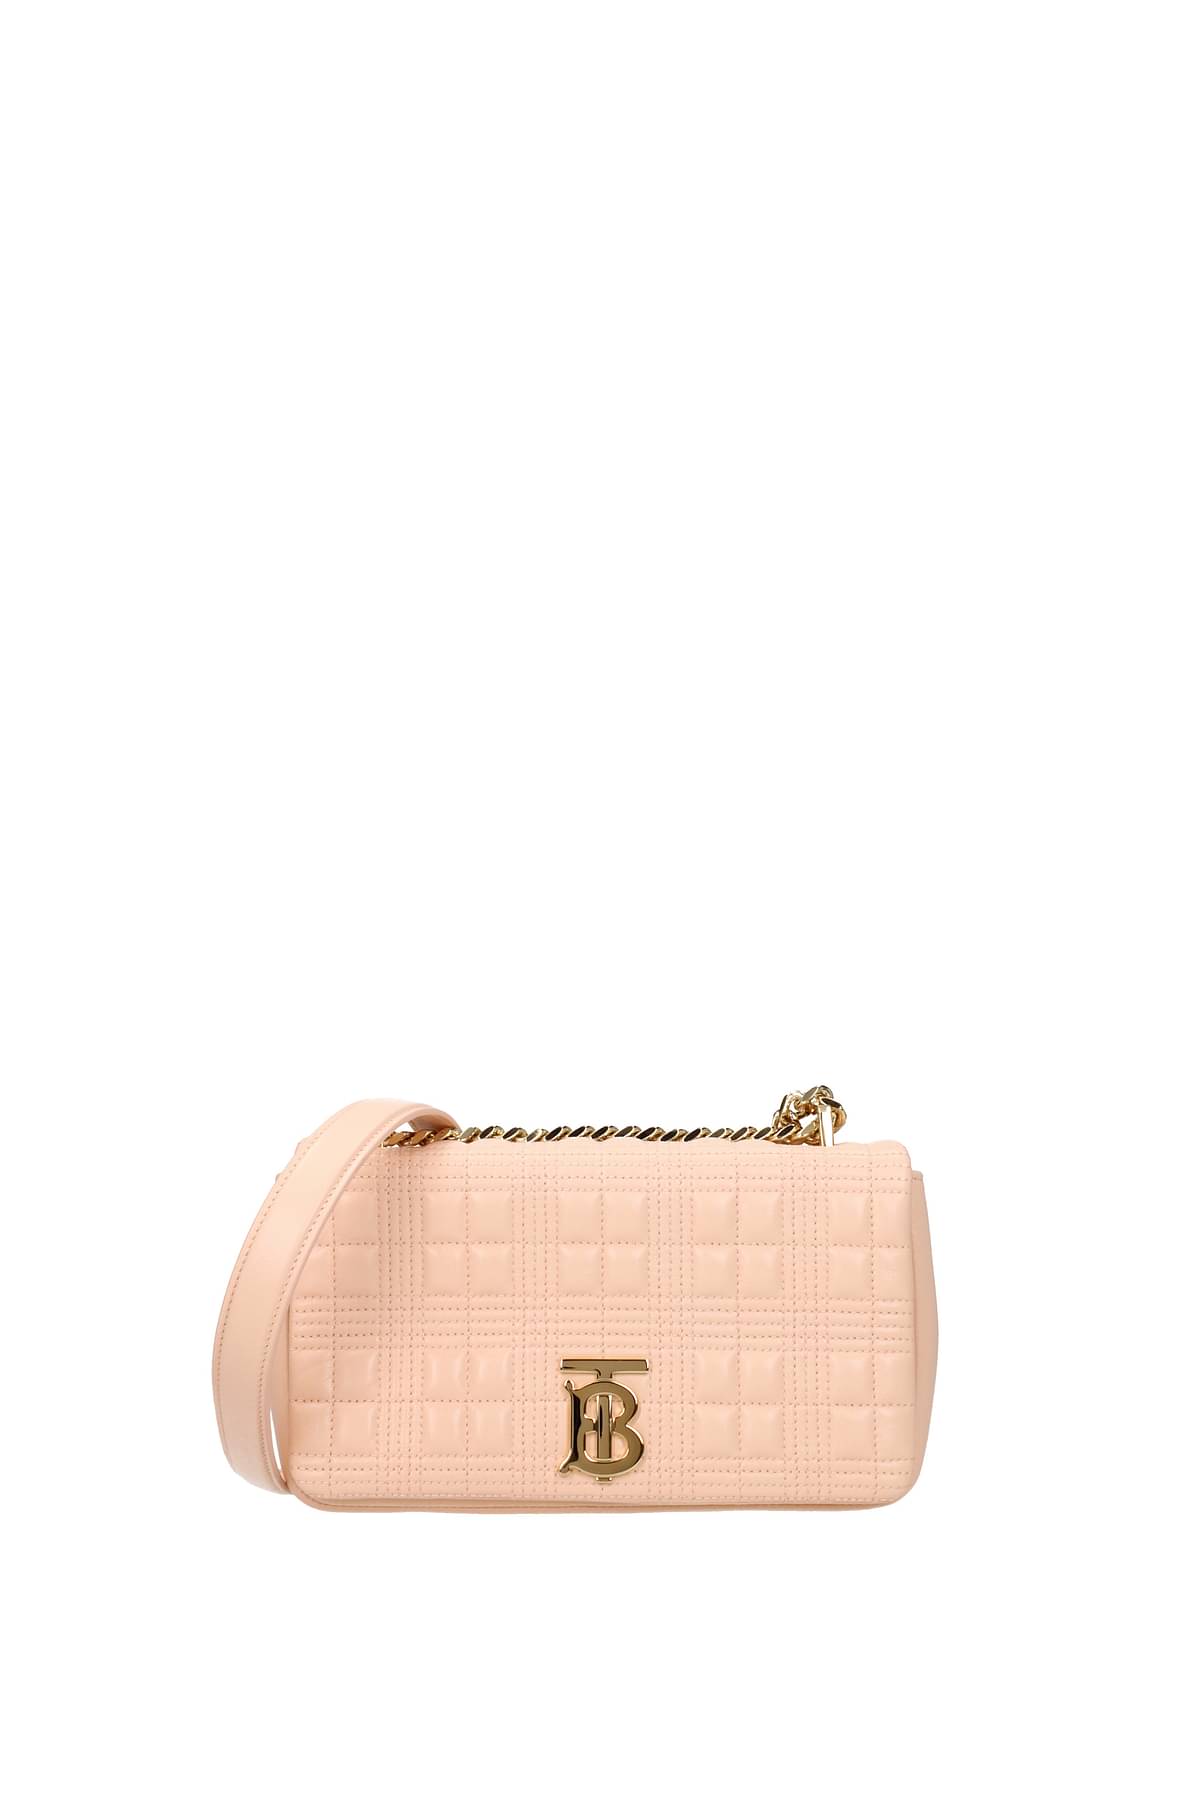 Burberry Women's Small Lola Quilted Leather Crossbody Bag - Peach Pink